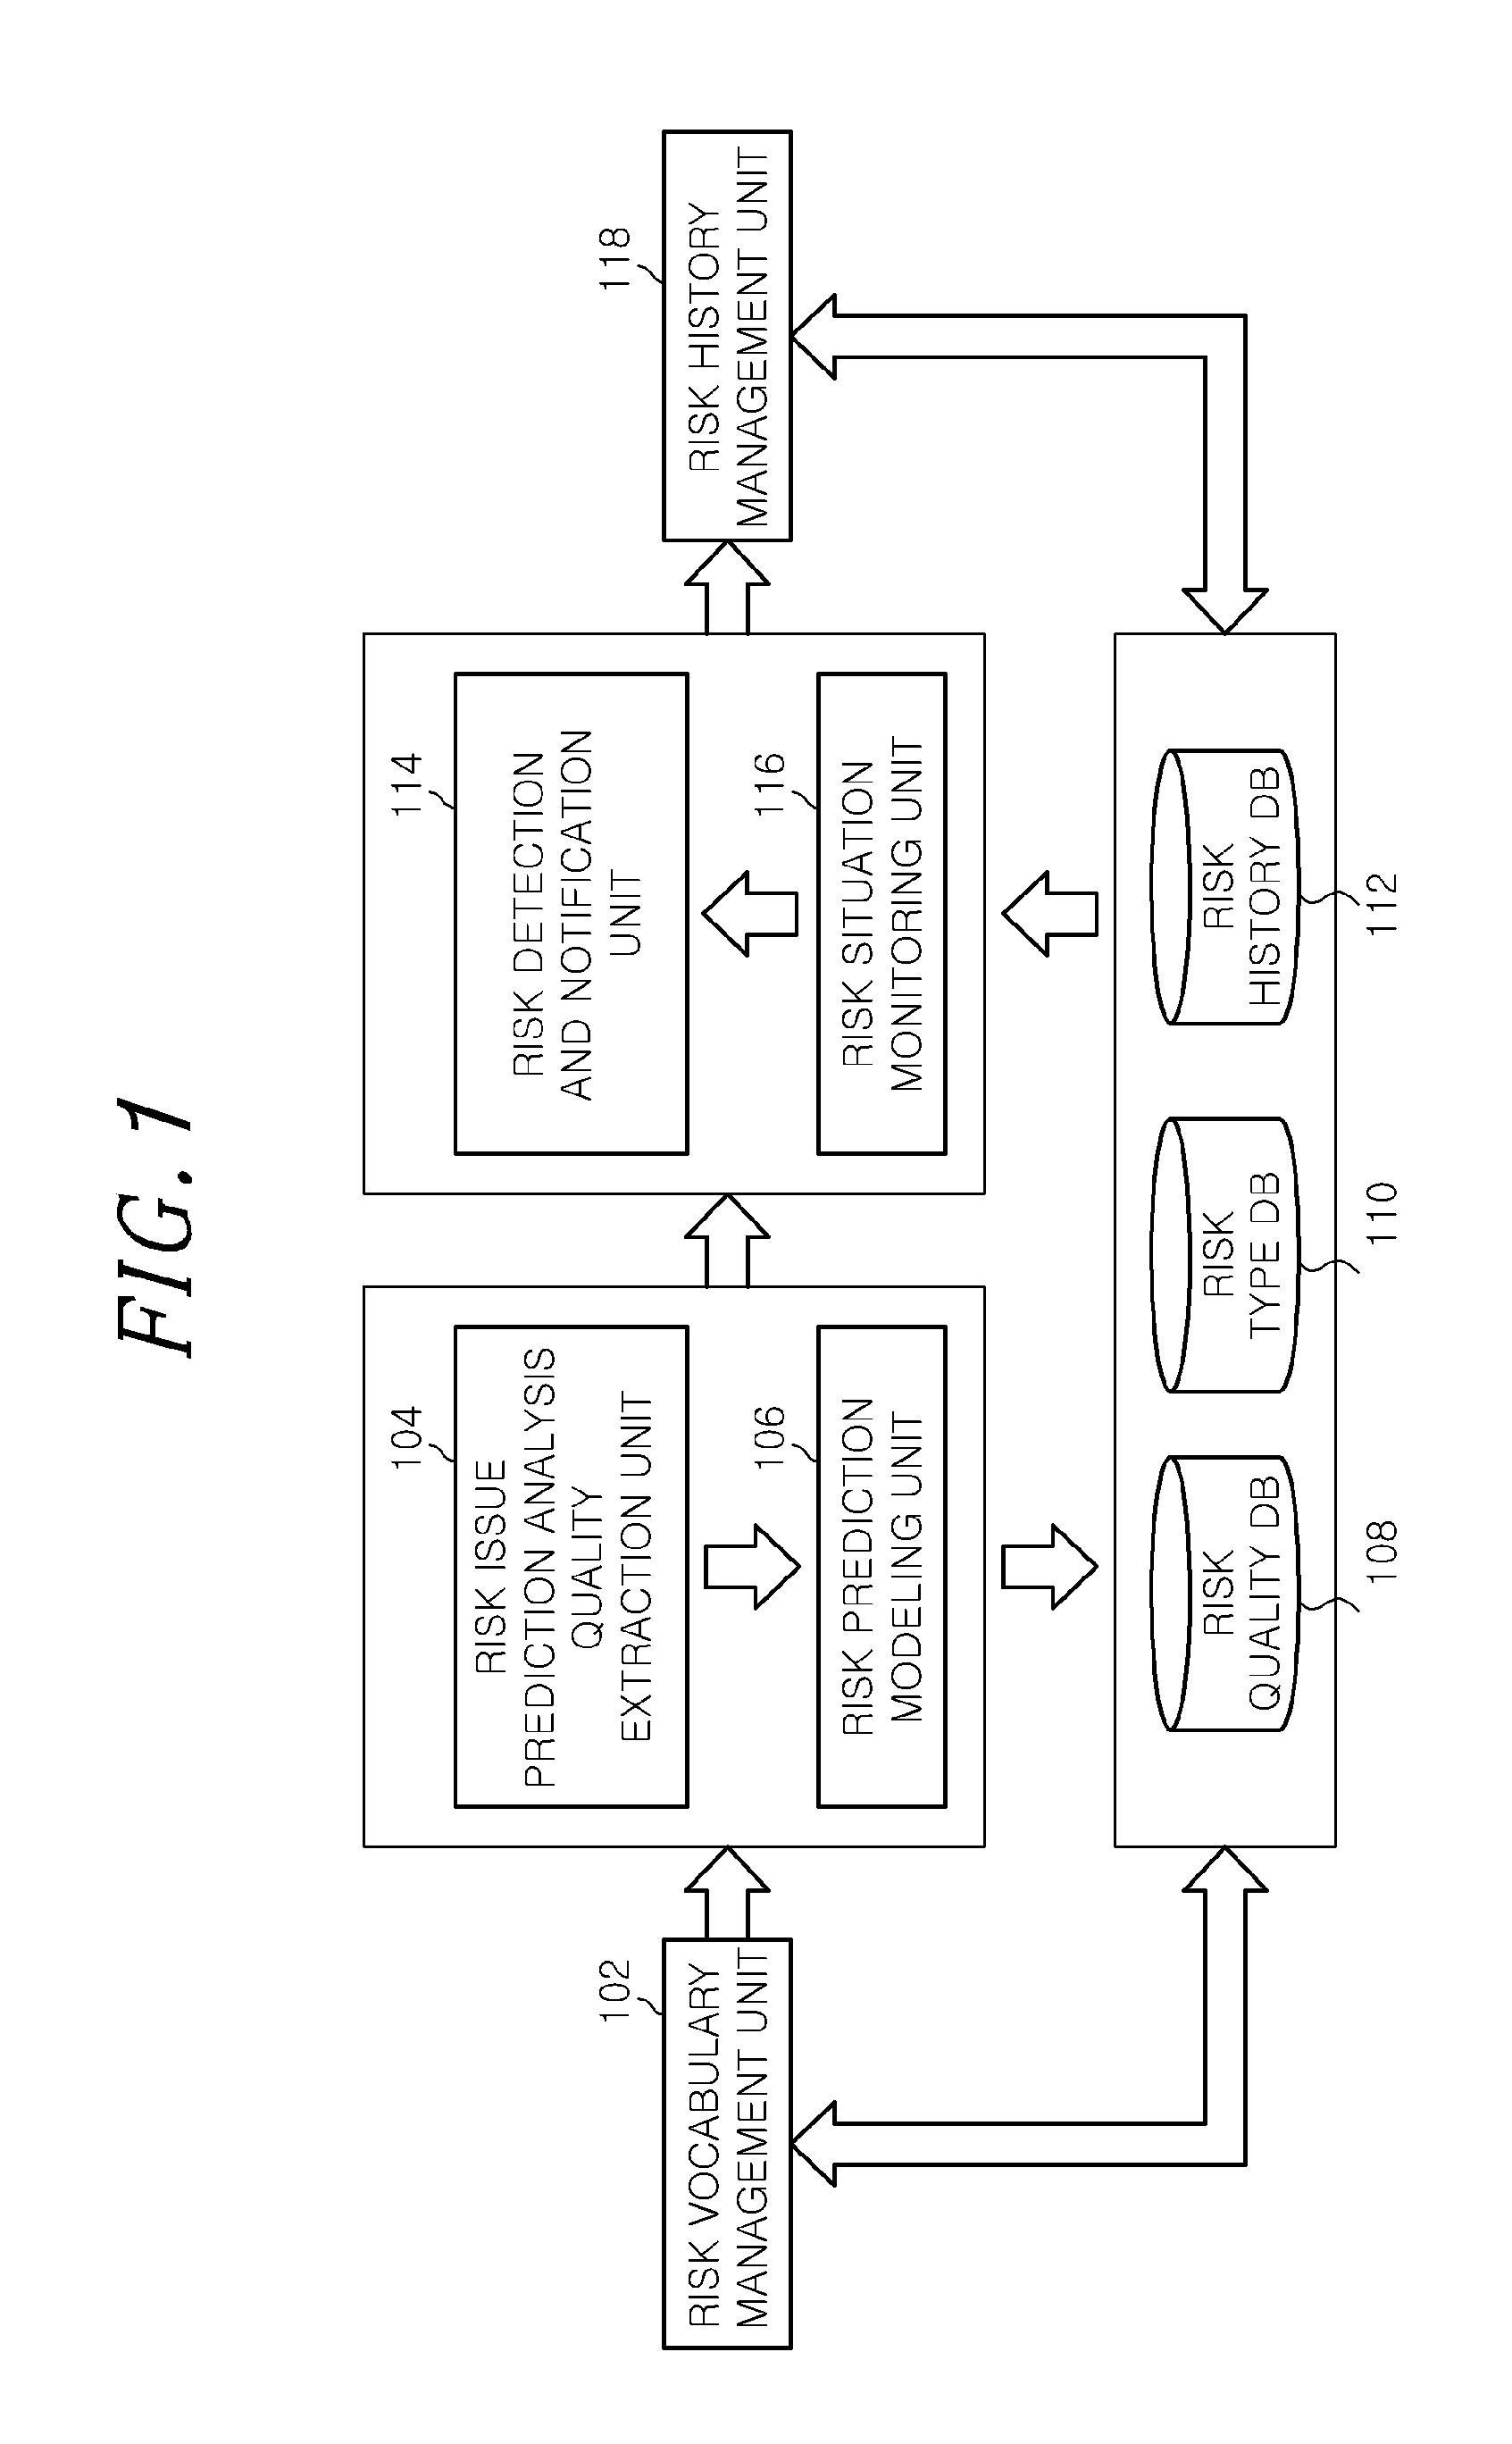 Apparatus and method for managing risk based on prediction on social web media